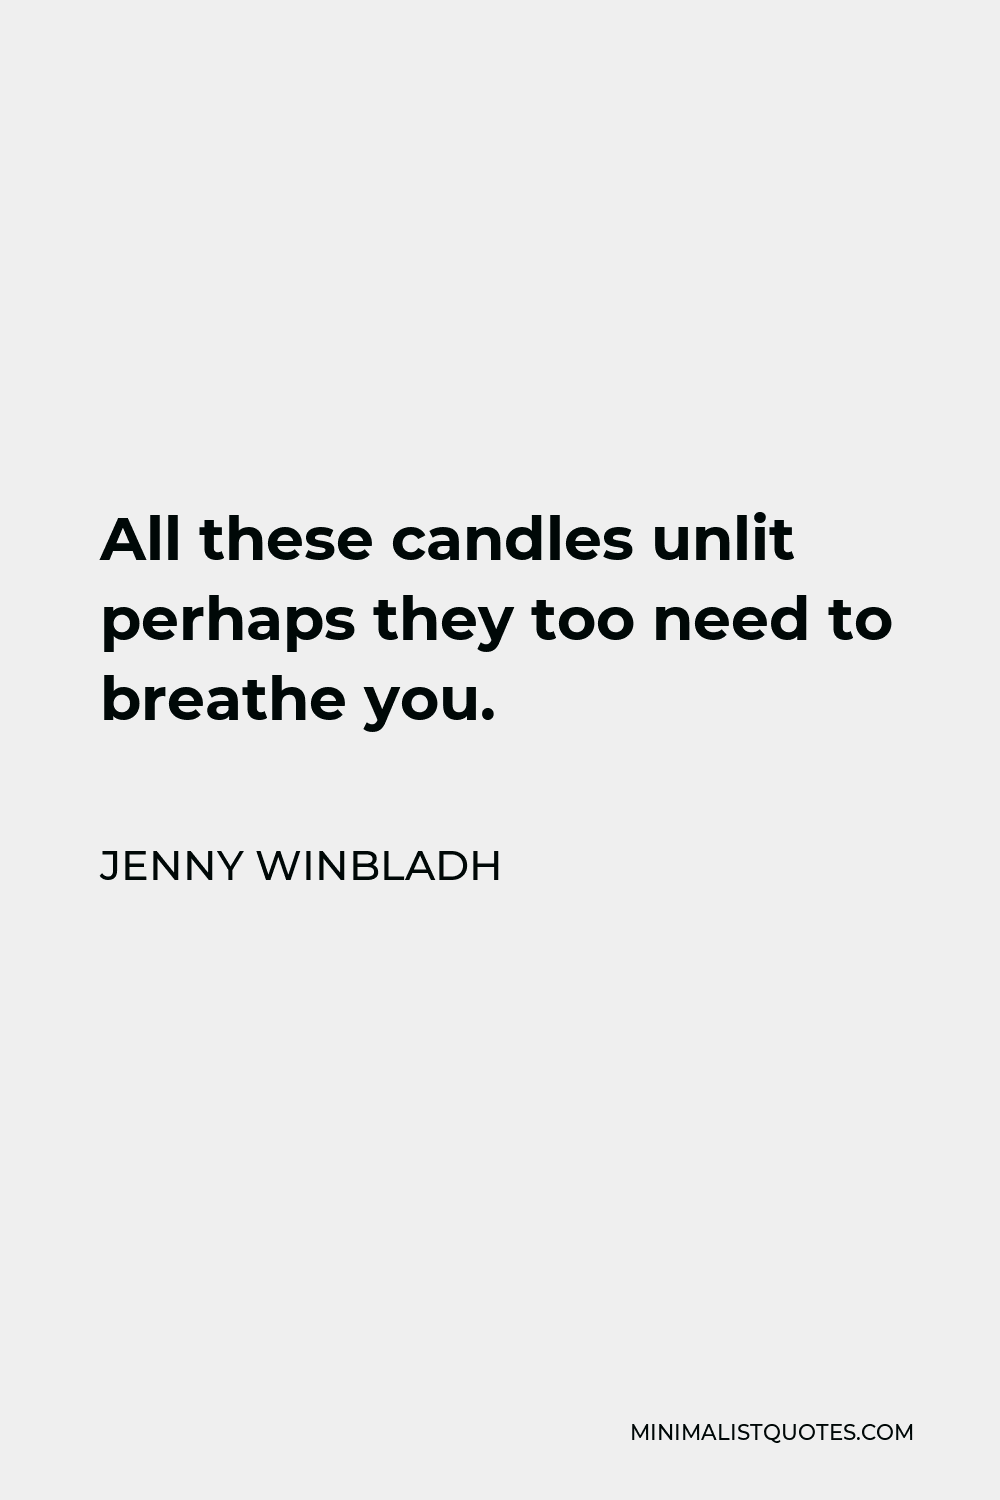 Jenny Winbladh Quote - All these candles unlit perhaps they too need to breathe you.